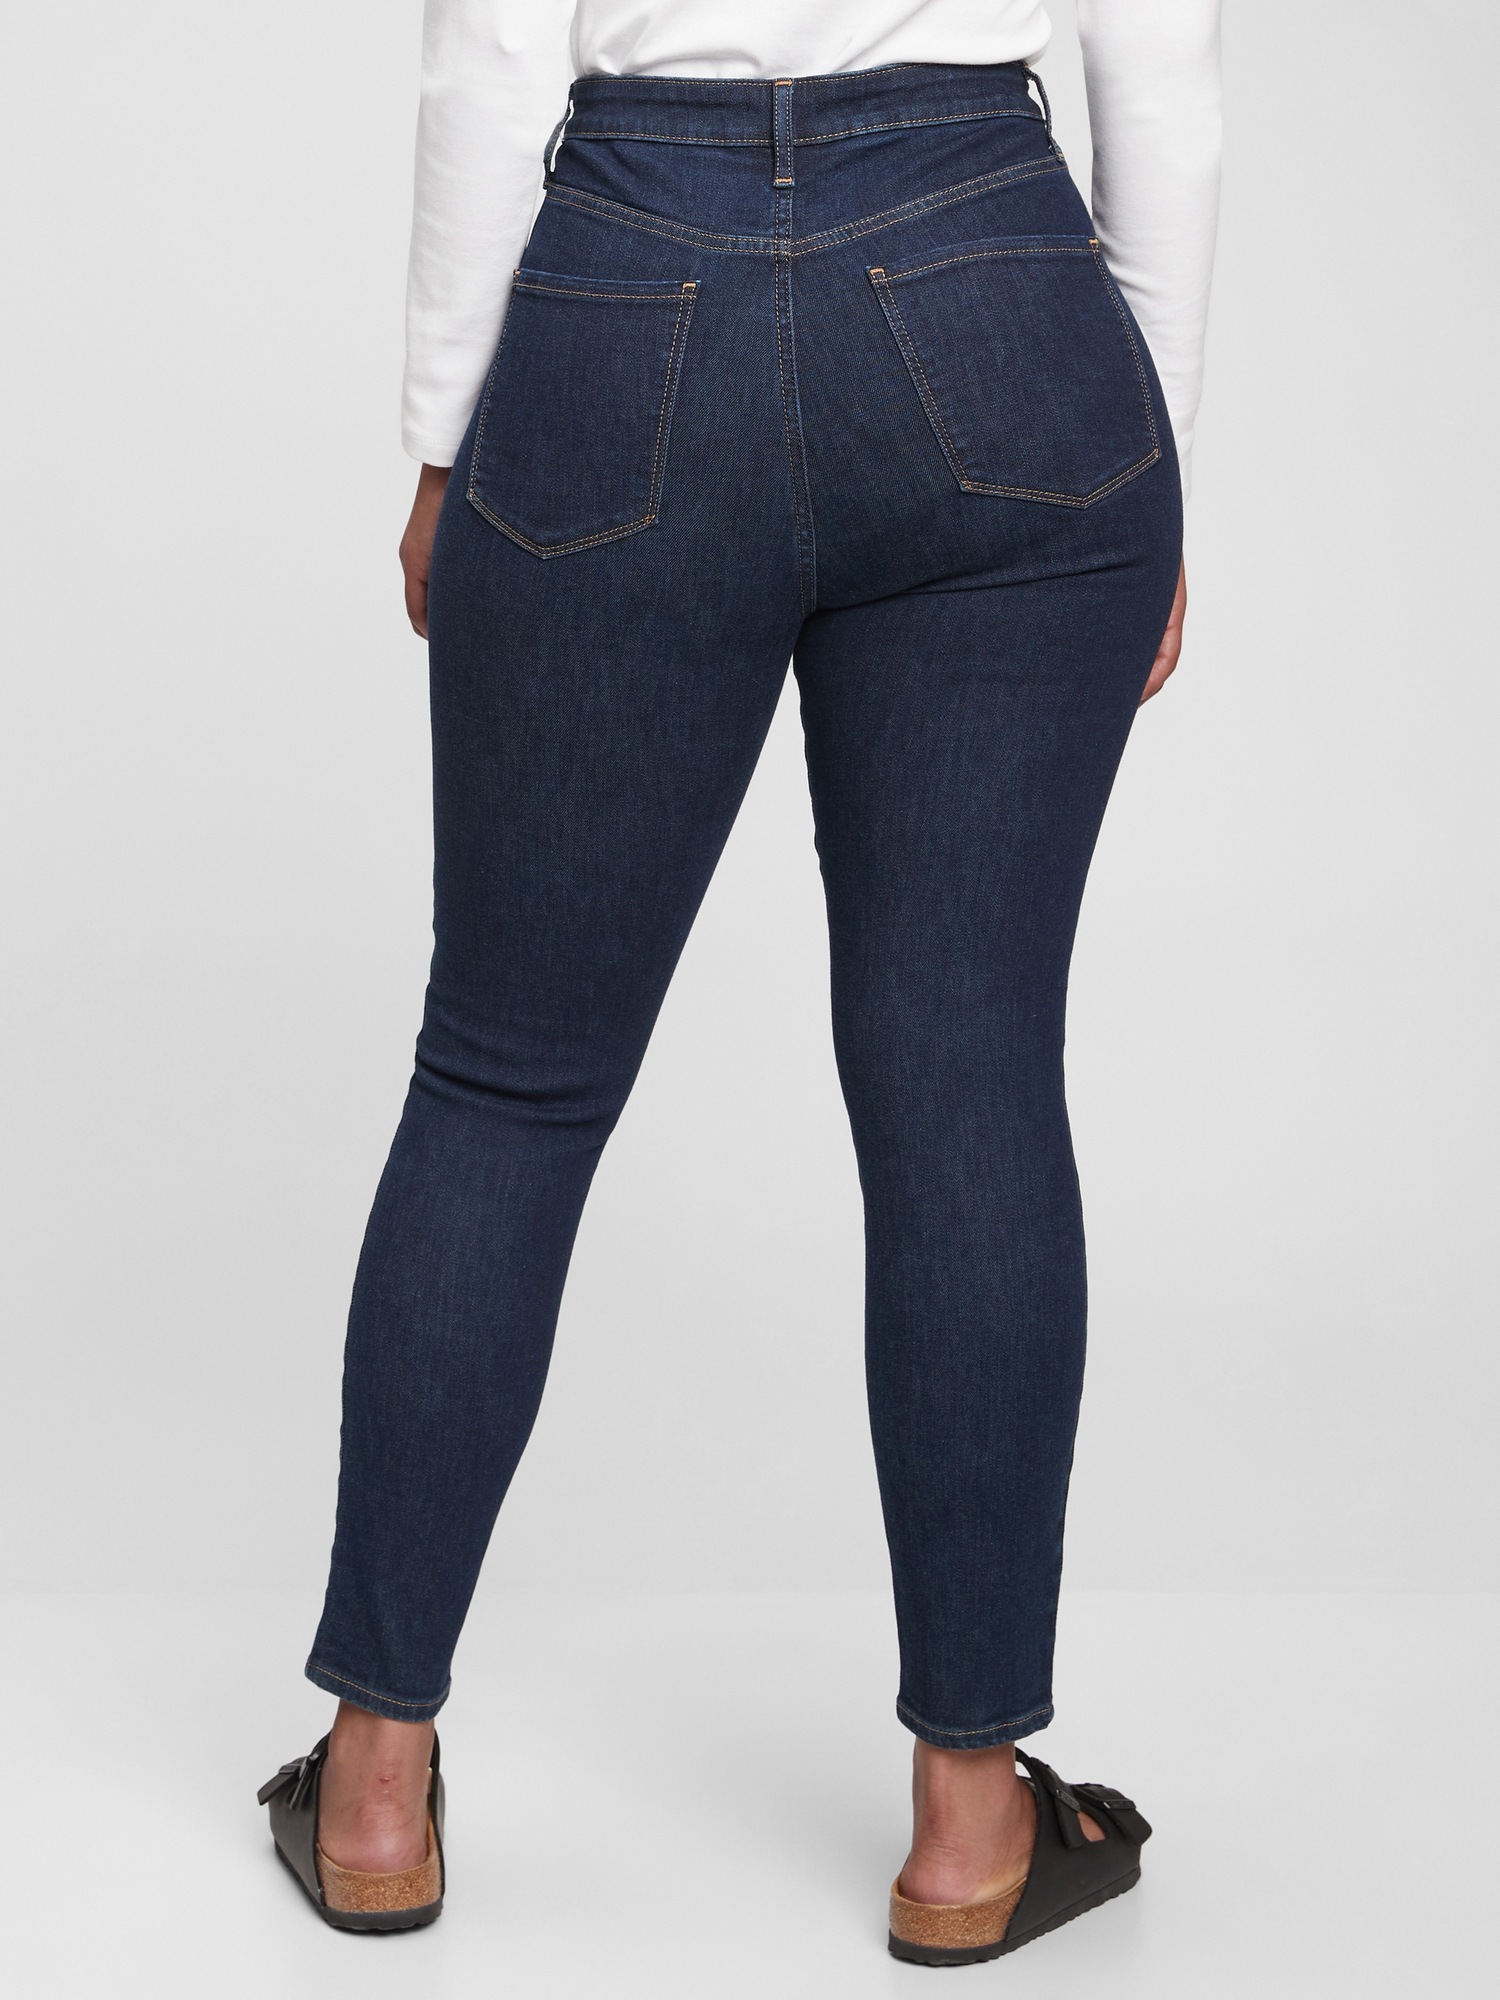 Sky High Rise Universal Jegging with Secret Smoothing Pockets with ...